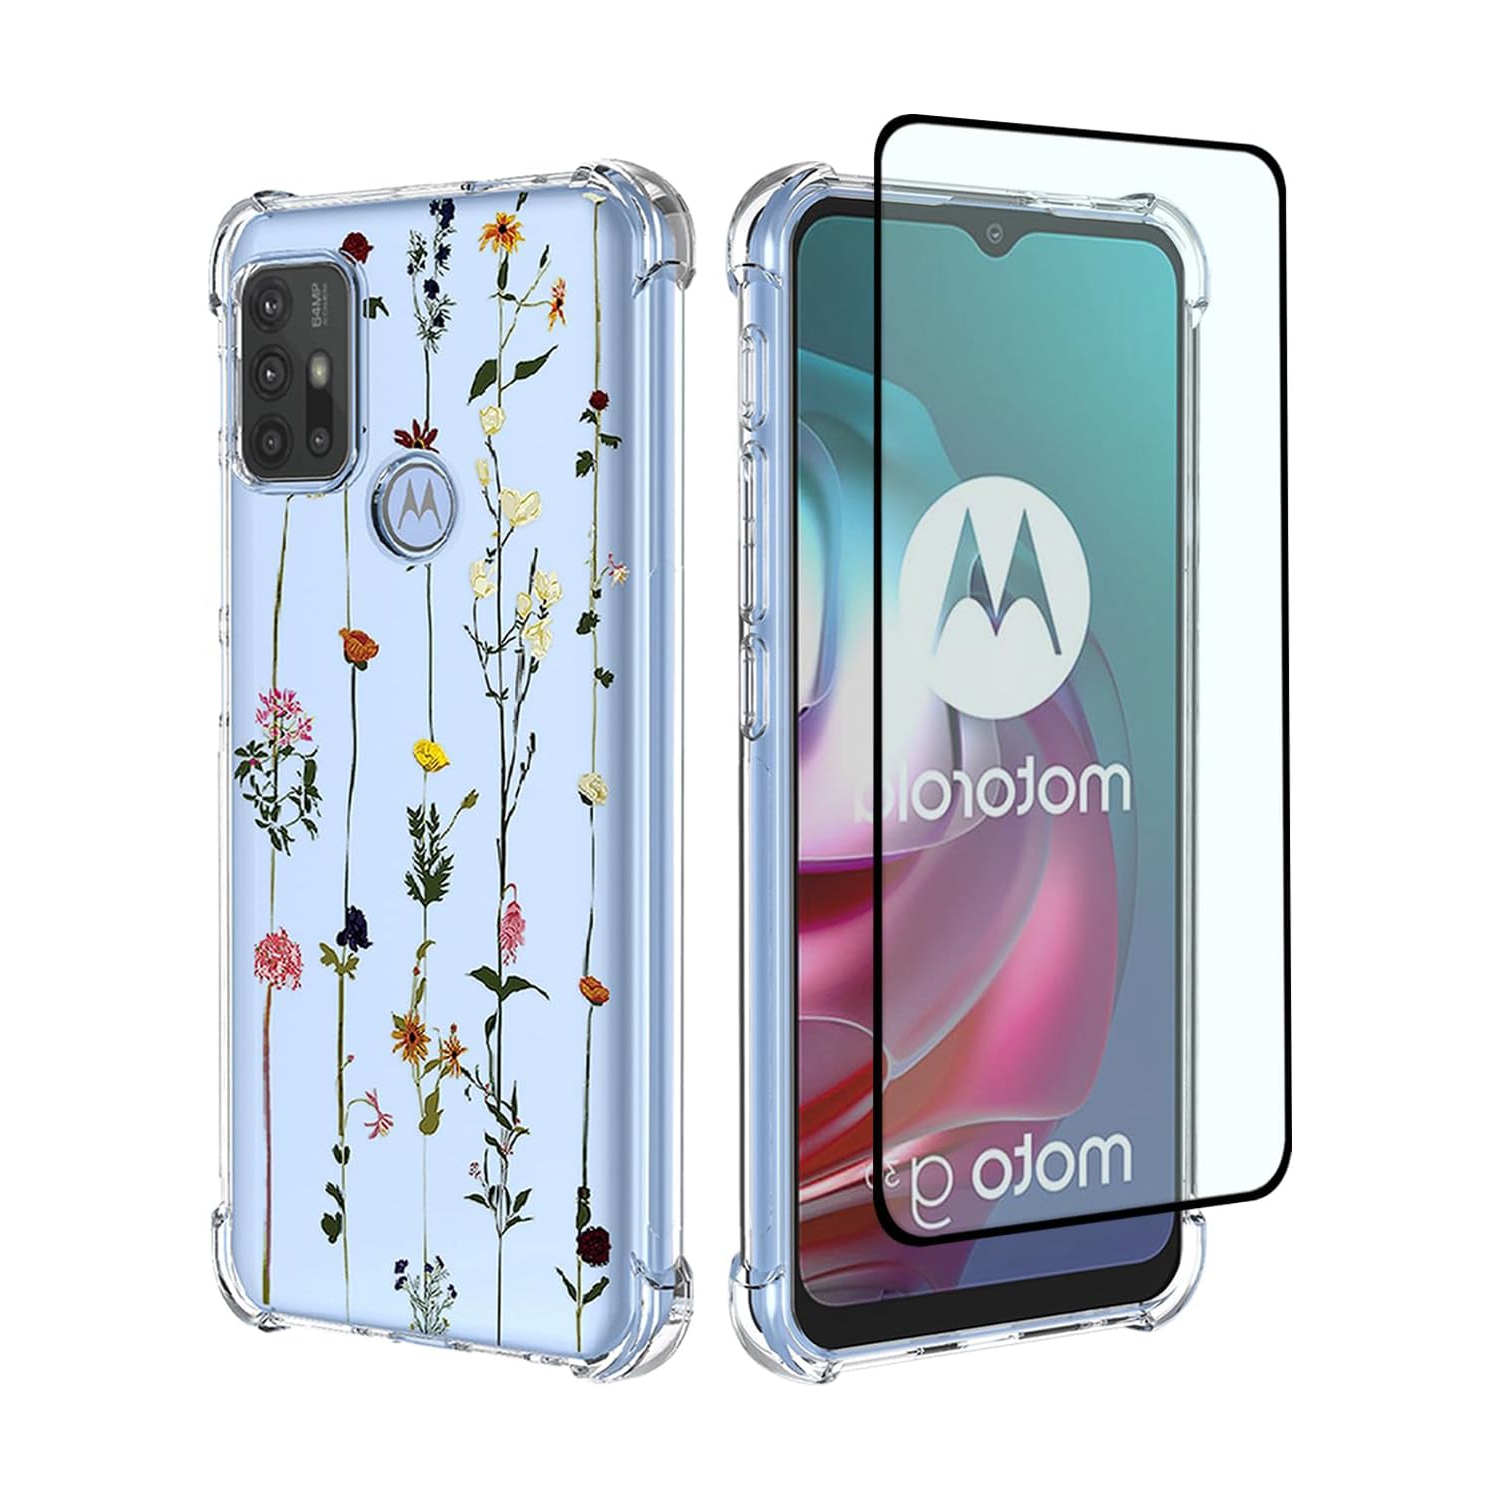 Phone Case for Moto G30/Motorola G10/Moto G20/MotoG10 Power XT2129 Case with Screen Protector, Clear Case